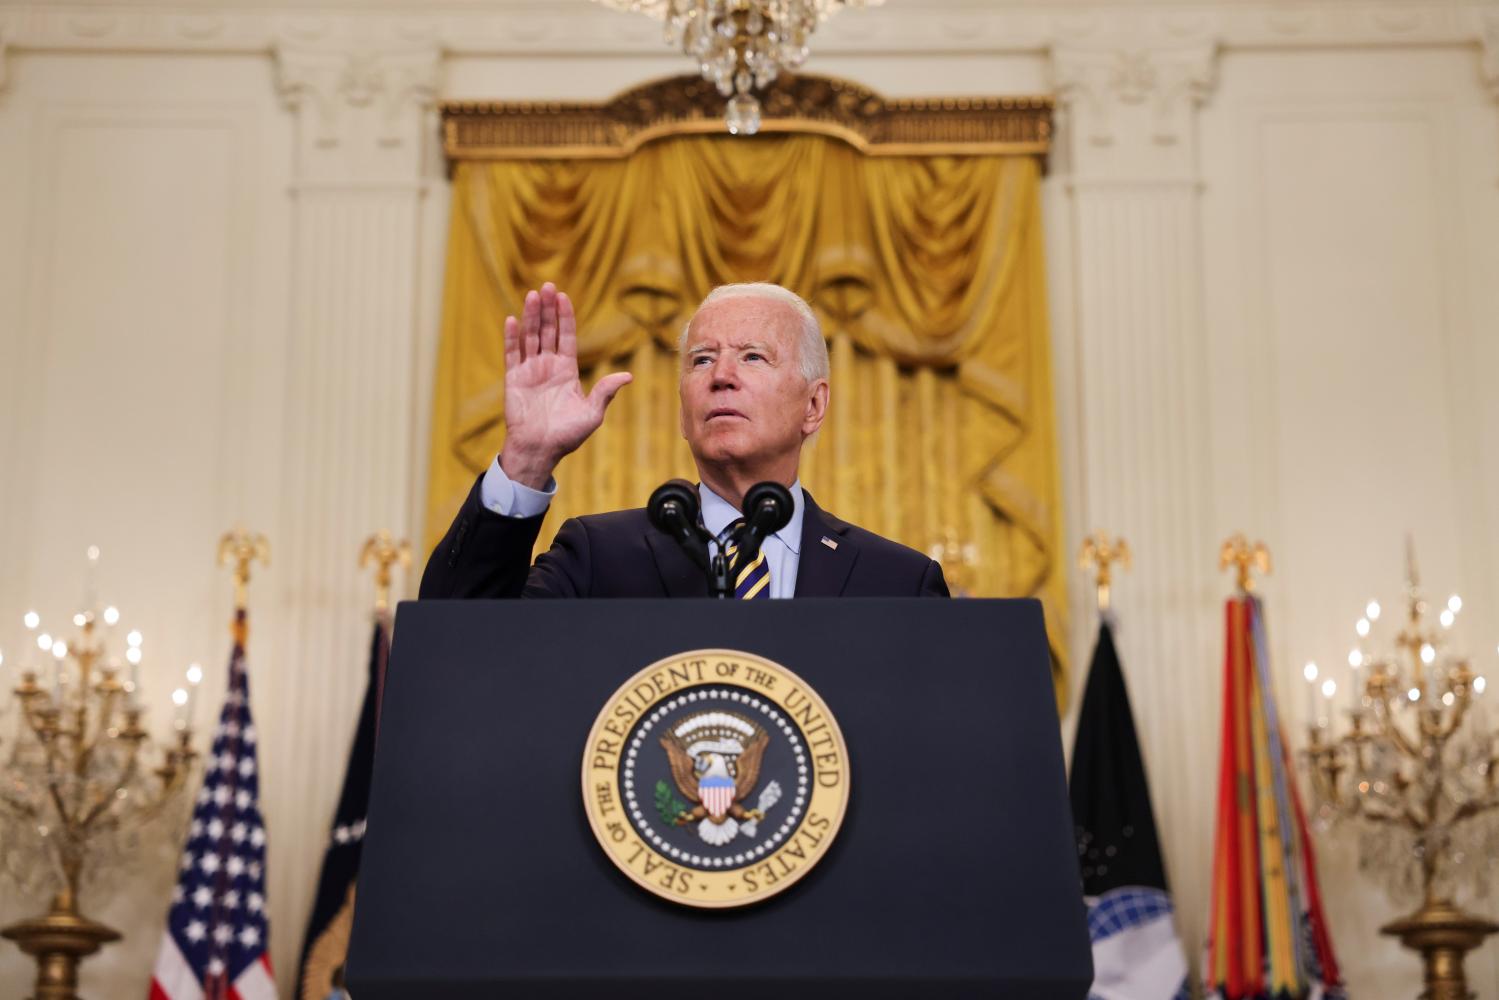 U.S. President Joe Biden delivers remarks on the administration's continued drawdown efforts in Afghanistan in a speech from the East Room at the White House in Washington U.S., July 8, 2021. REUTERS/Evelyn Hockstein